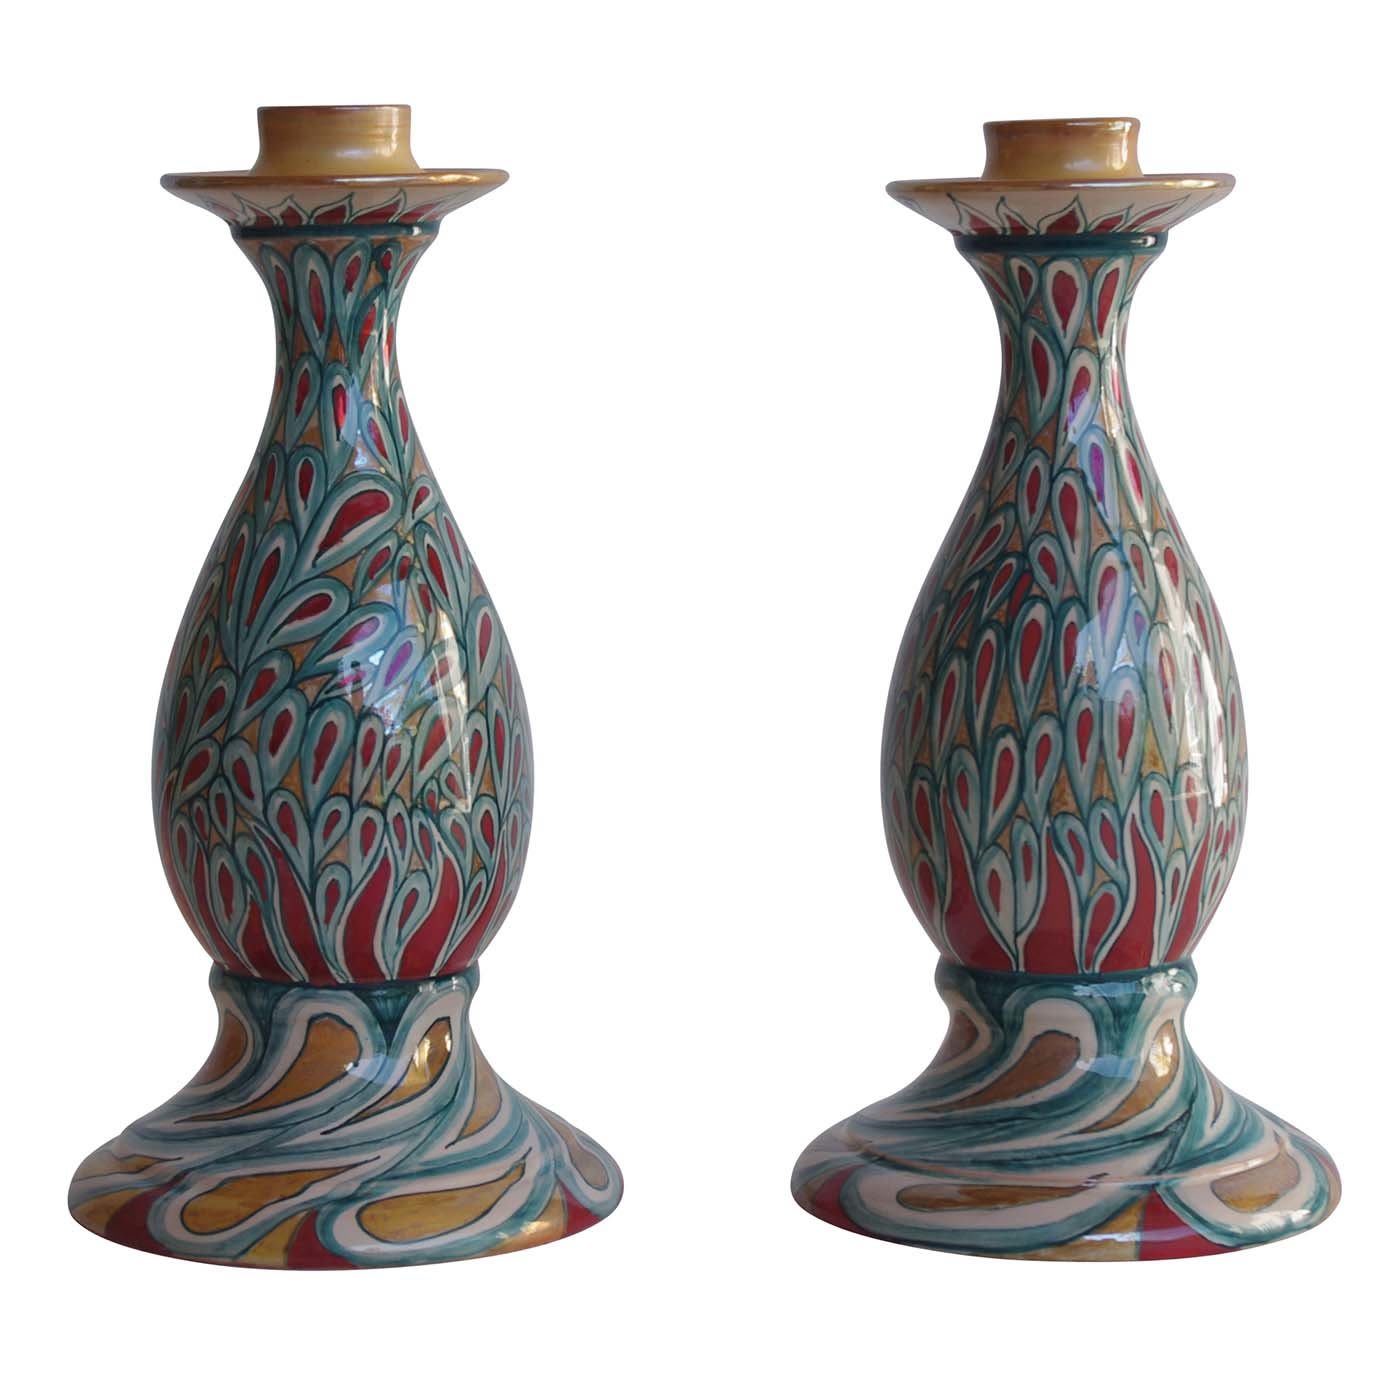 Pair of 2 Candle Holders - Iridescenze